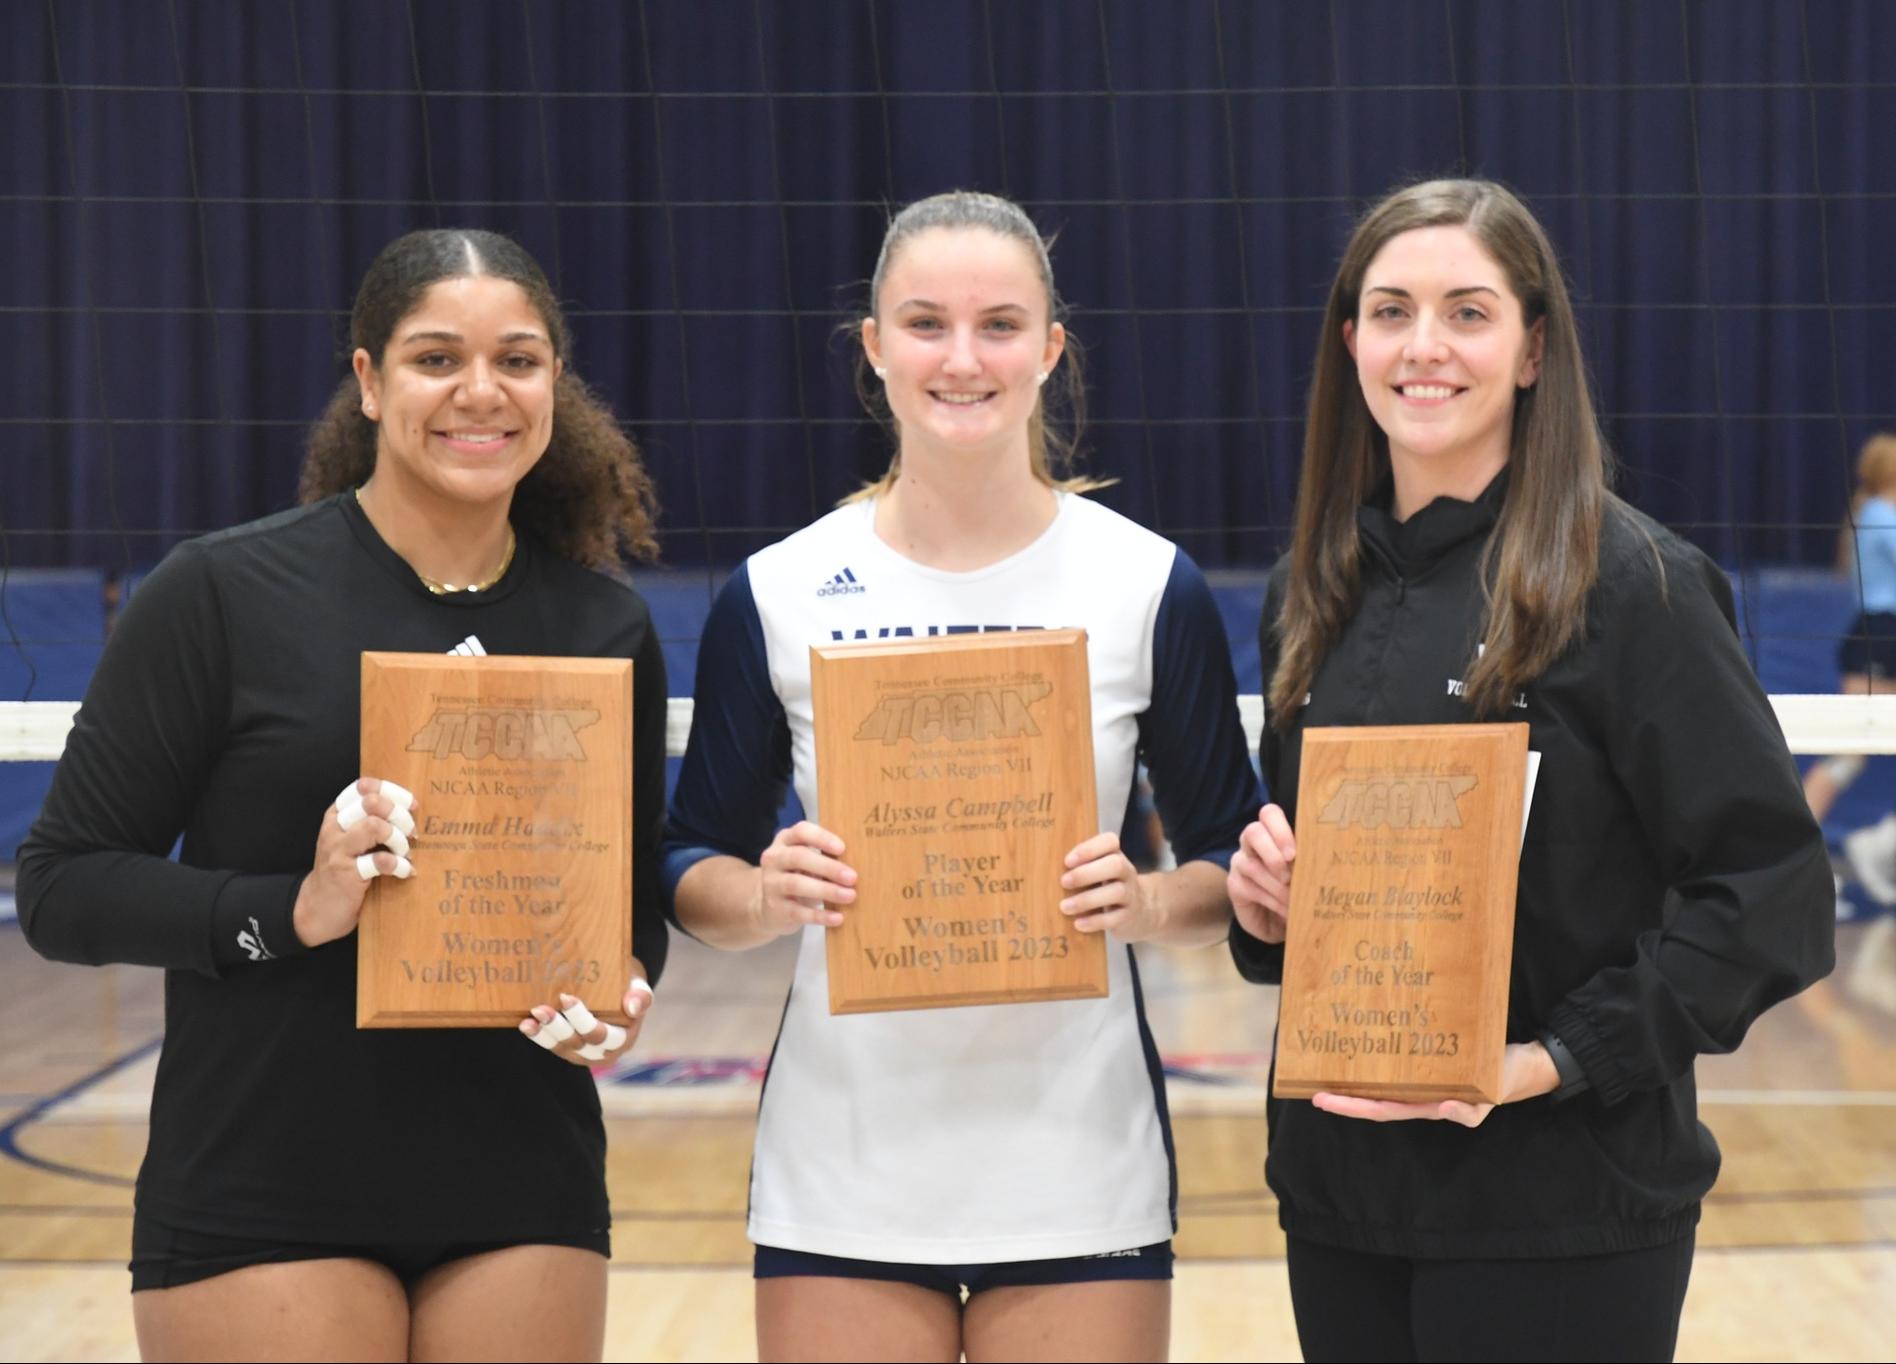 TCCAA VOLLEYBALL AWARDS: Emma Haddix, Freshman of they Year (Chattanooga State), Alyssa Campbell, Player of the Year (Walters State), and Megan Blaylock, Coach of the Year (Walters State).